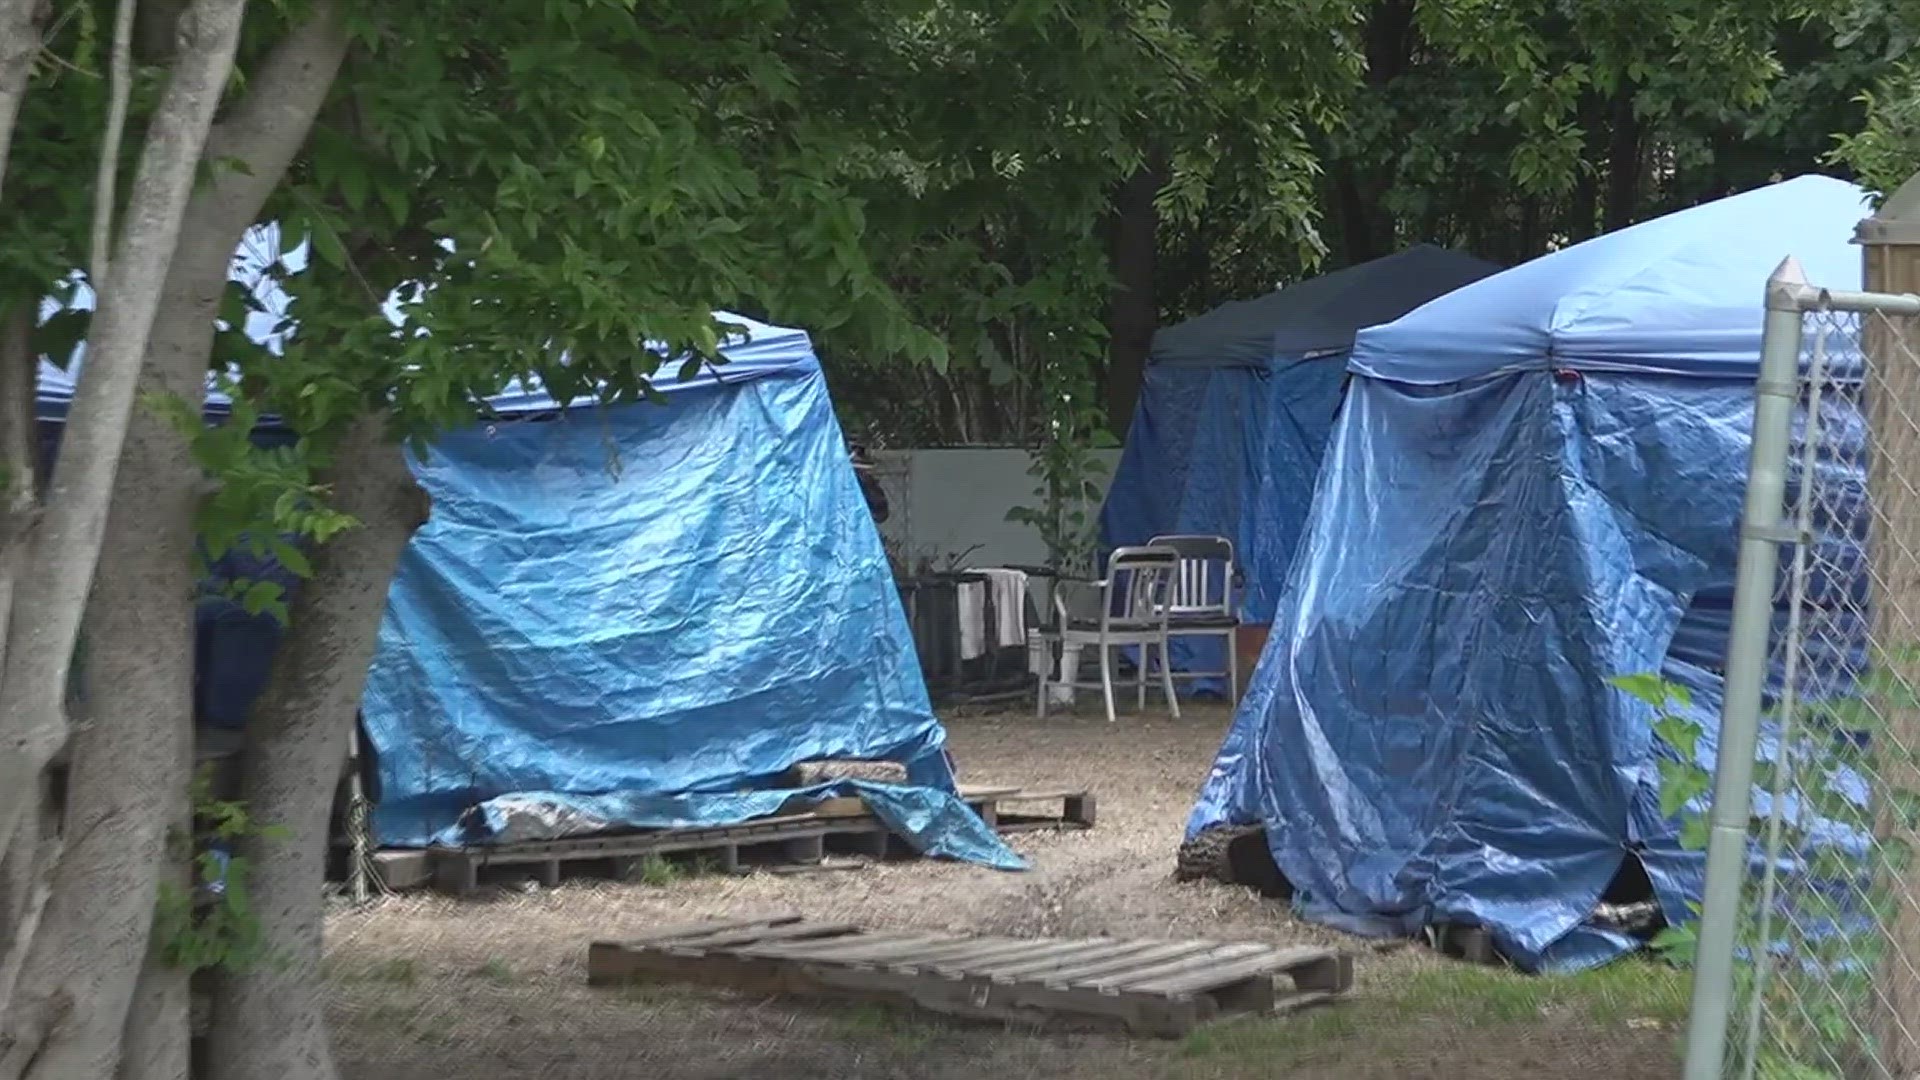 Resident concerned about homeless camps in Beaumont's Old Town neighborhood